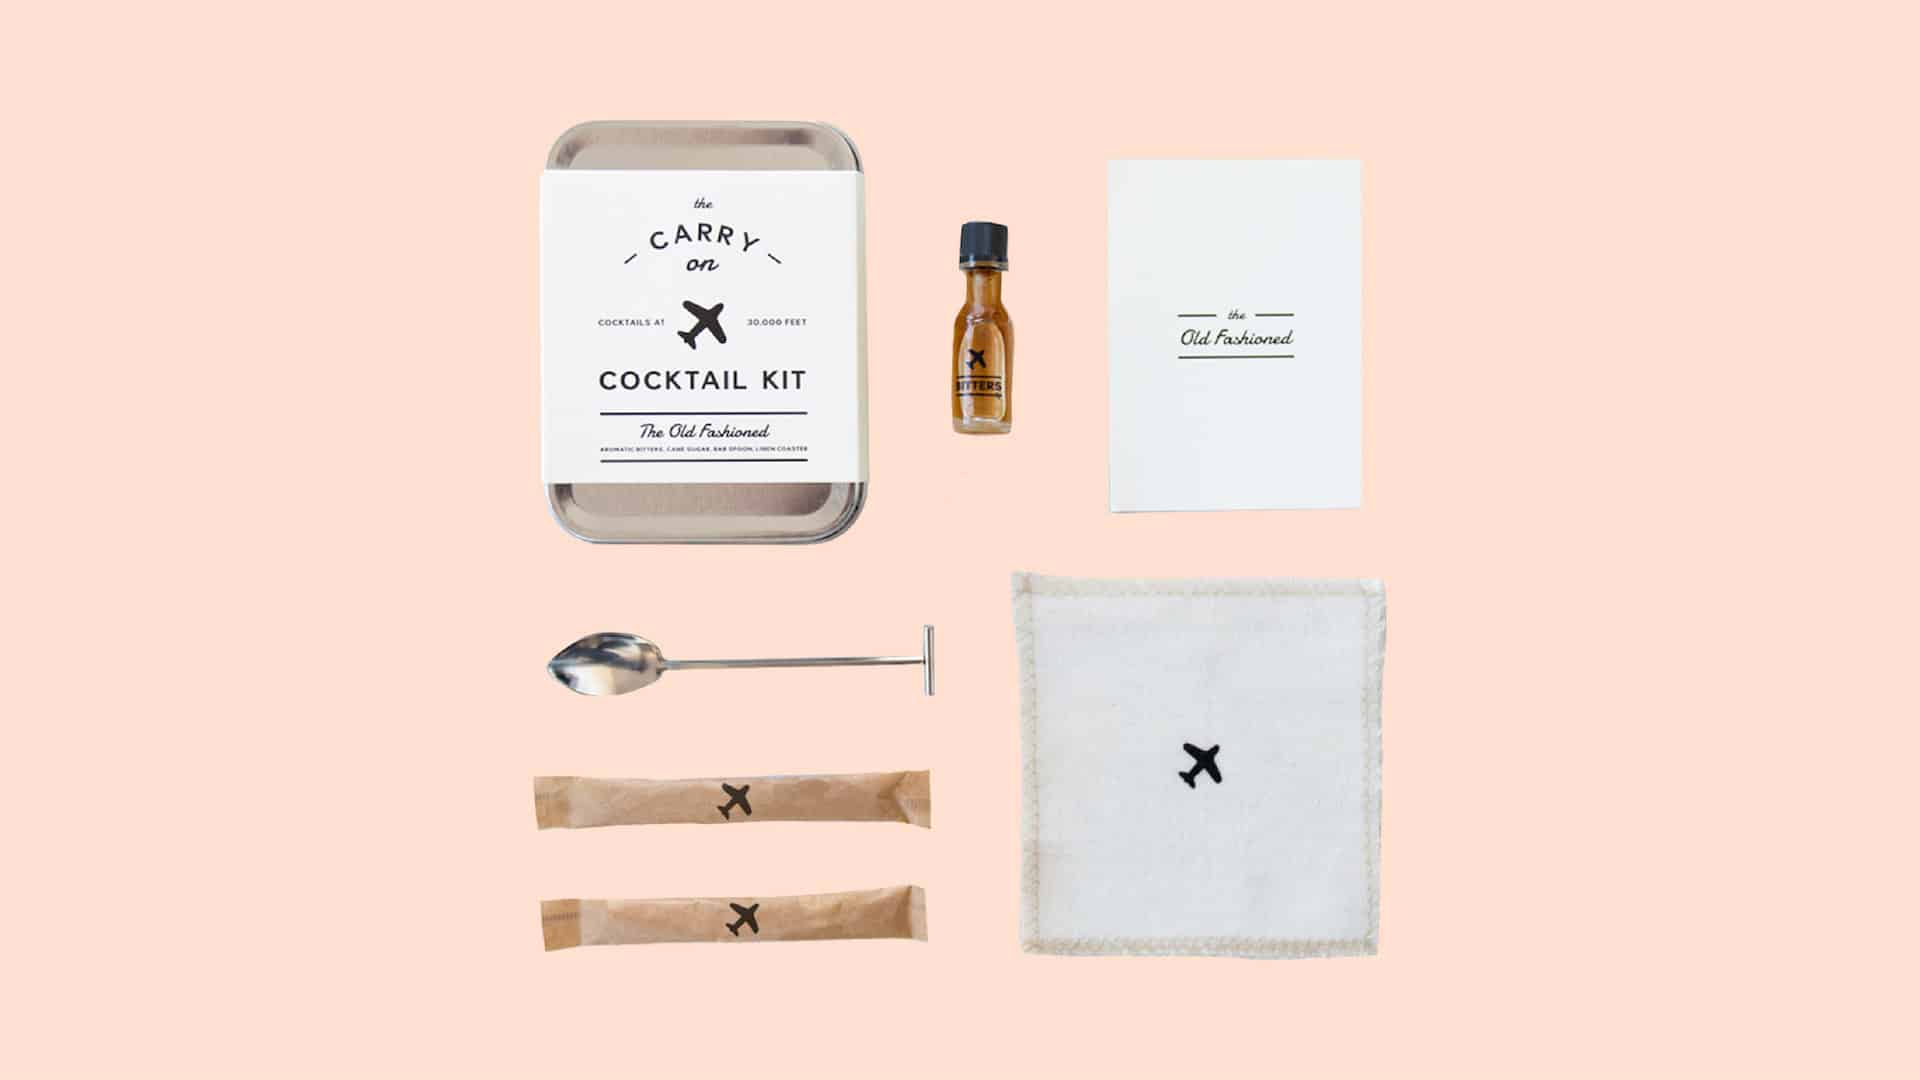 A cocktail kit